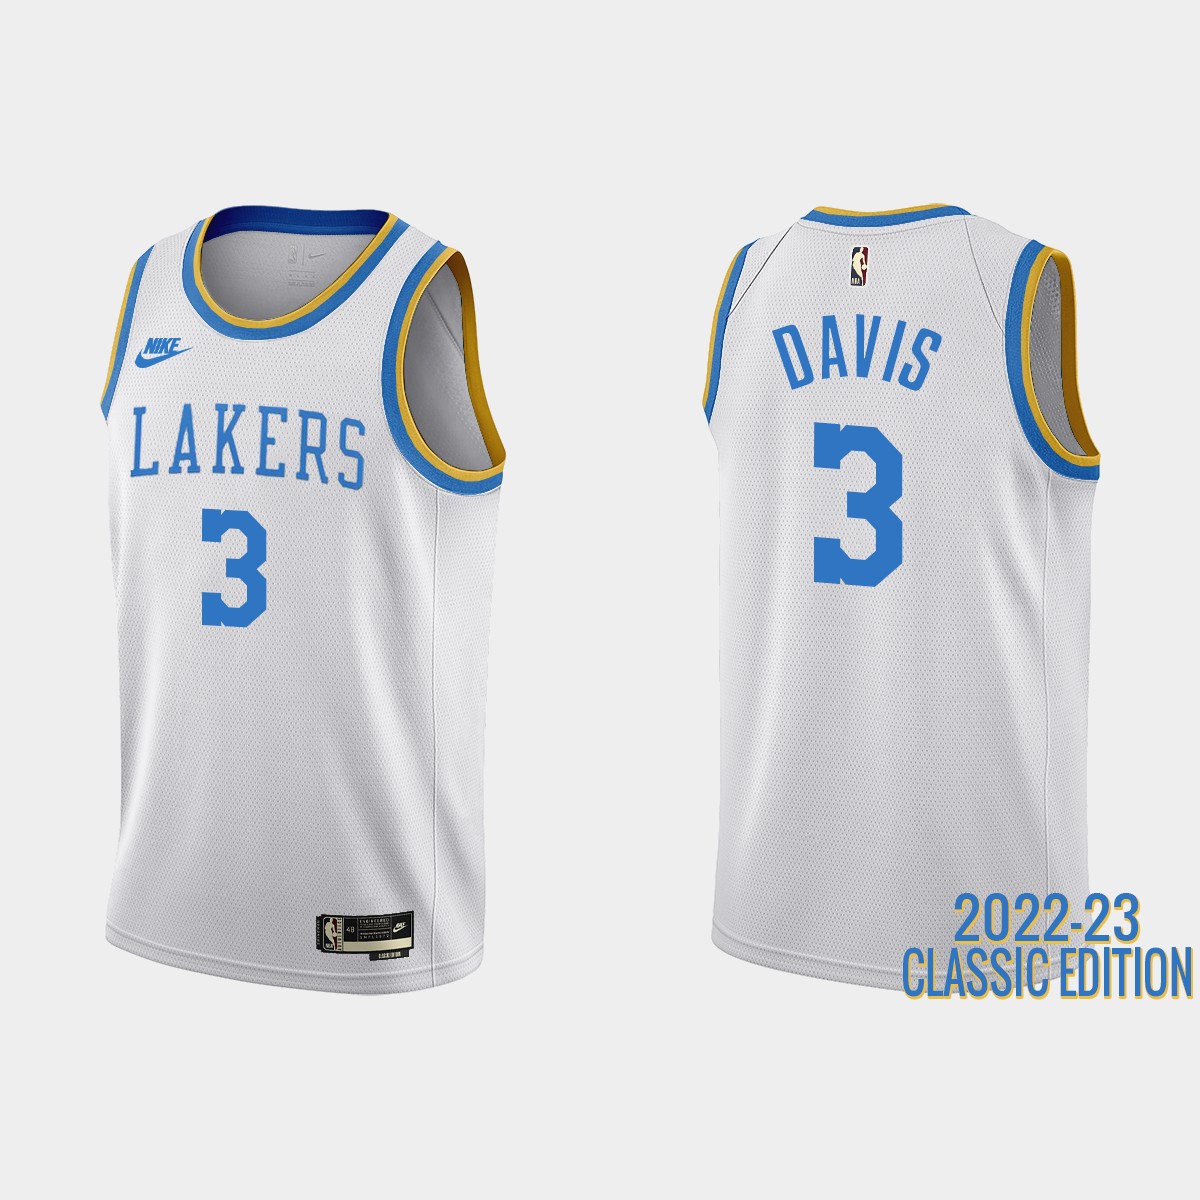 Anthony Davis #3 Los Angeles Lakers 2022-23 Classic Edition White Jersey